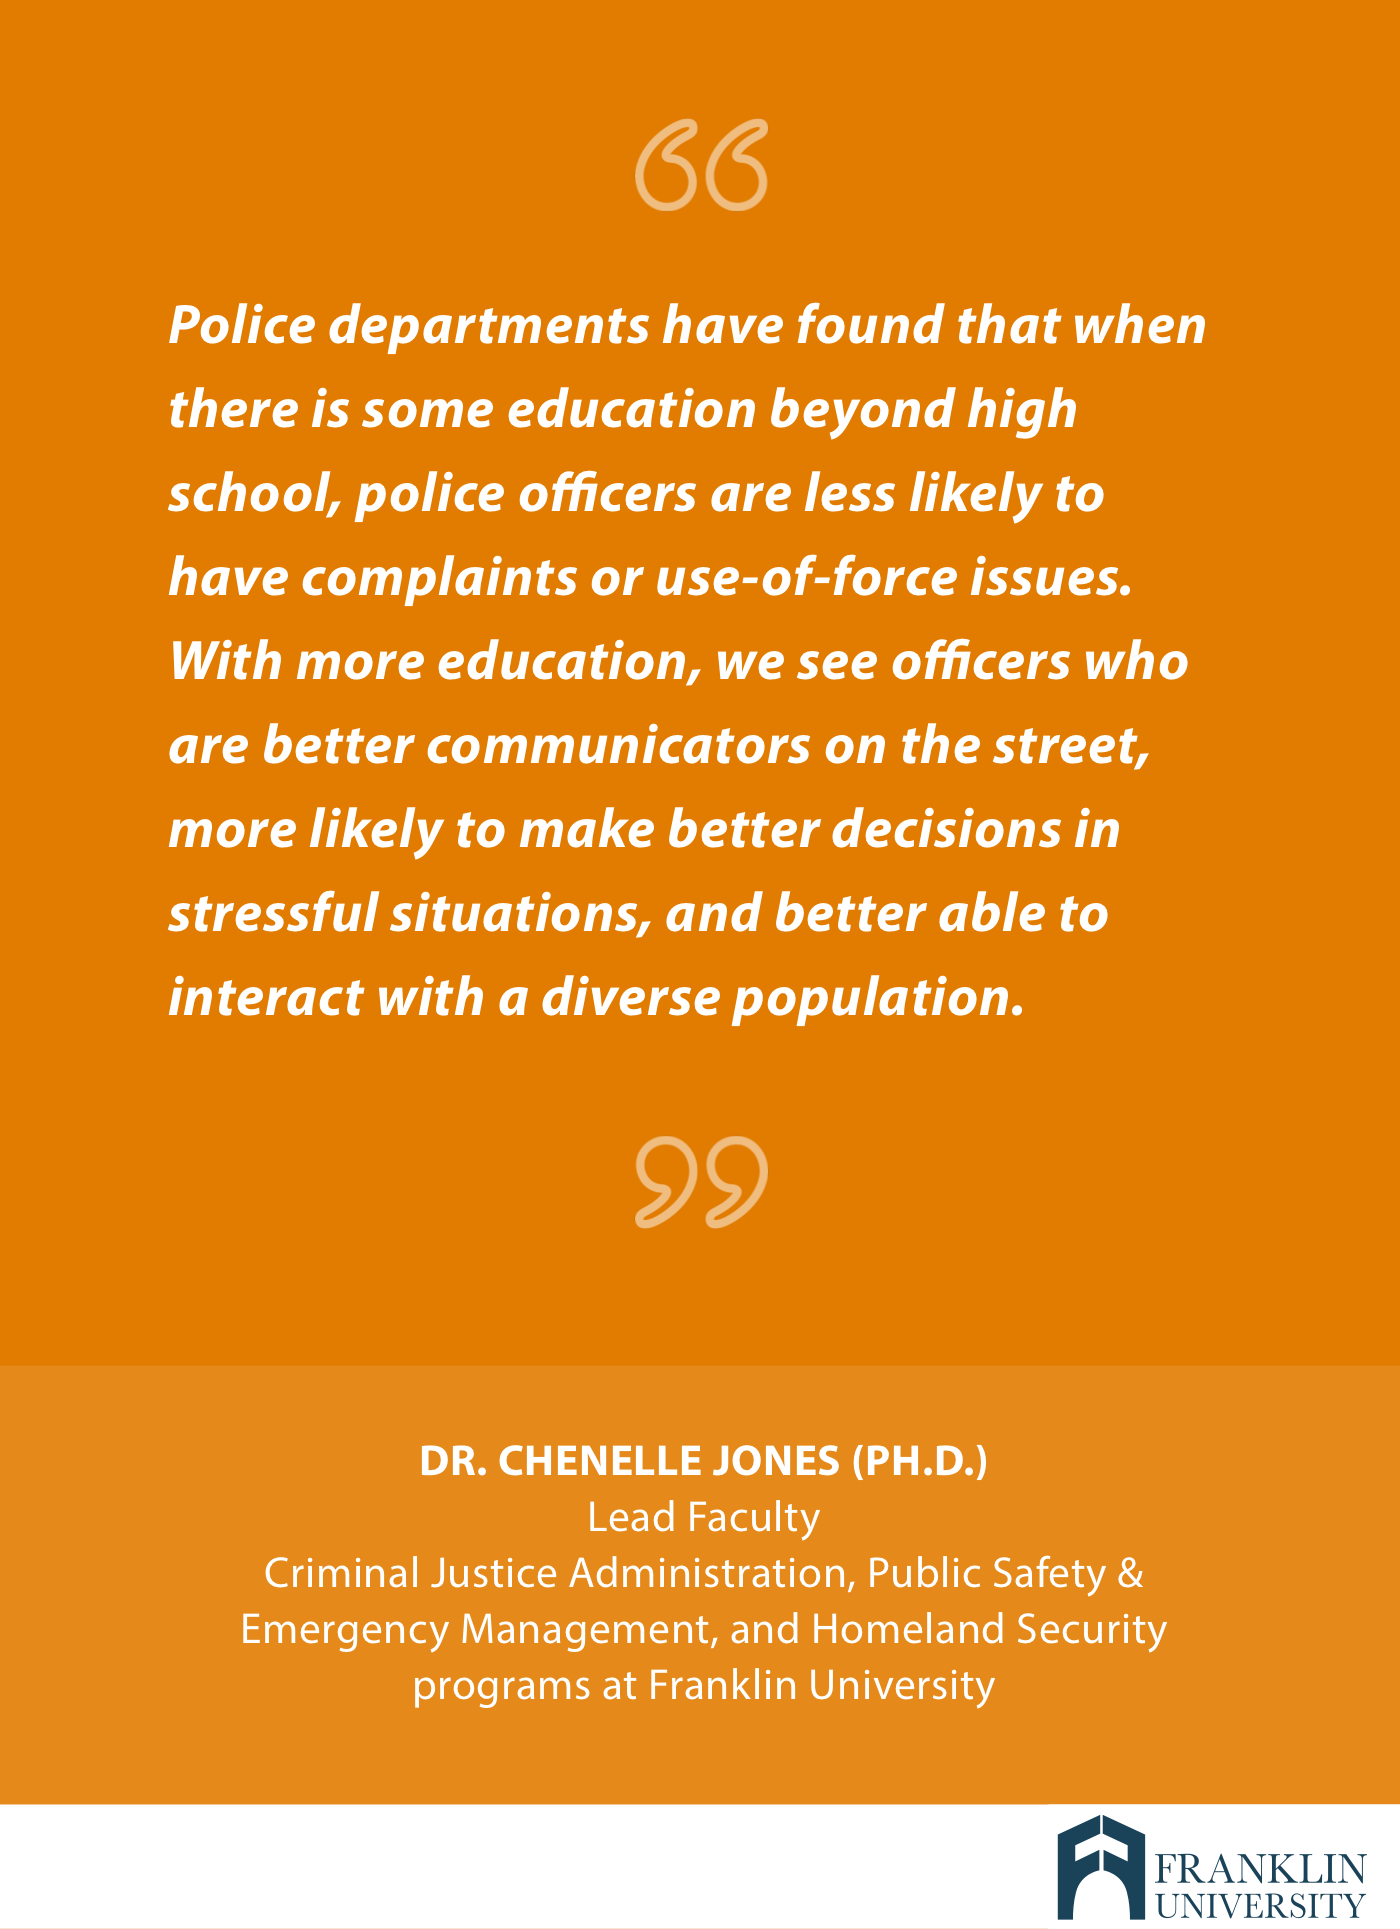 graphic describes a quote stating police officers are able to perform better with higher education 